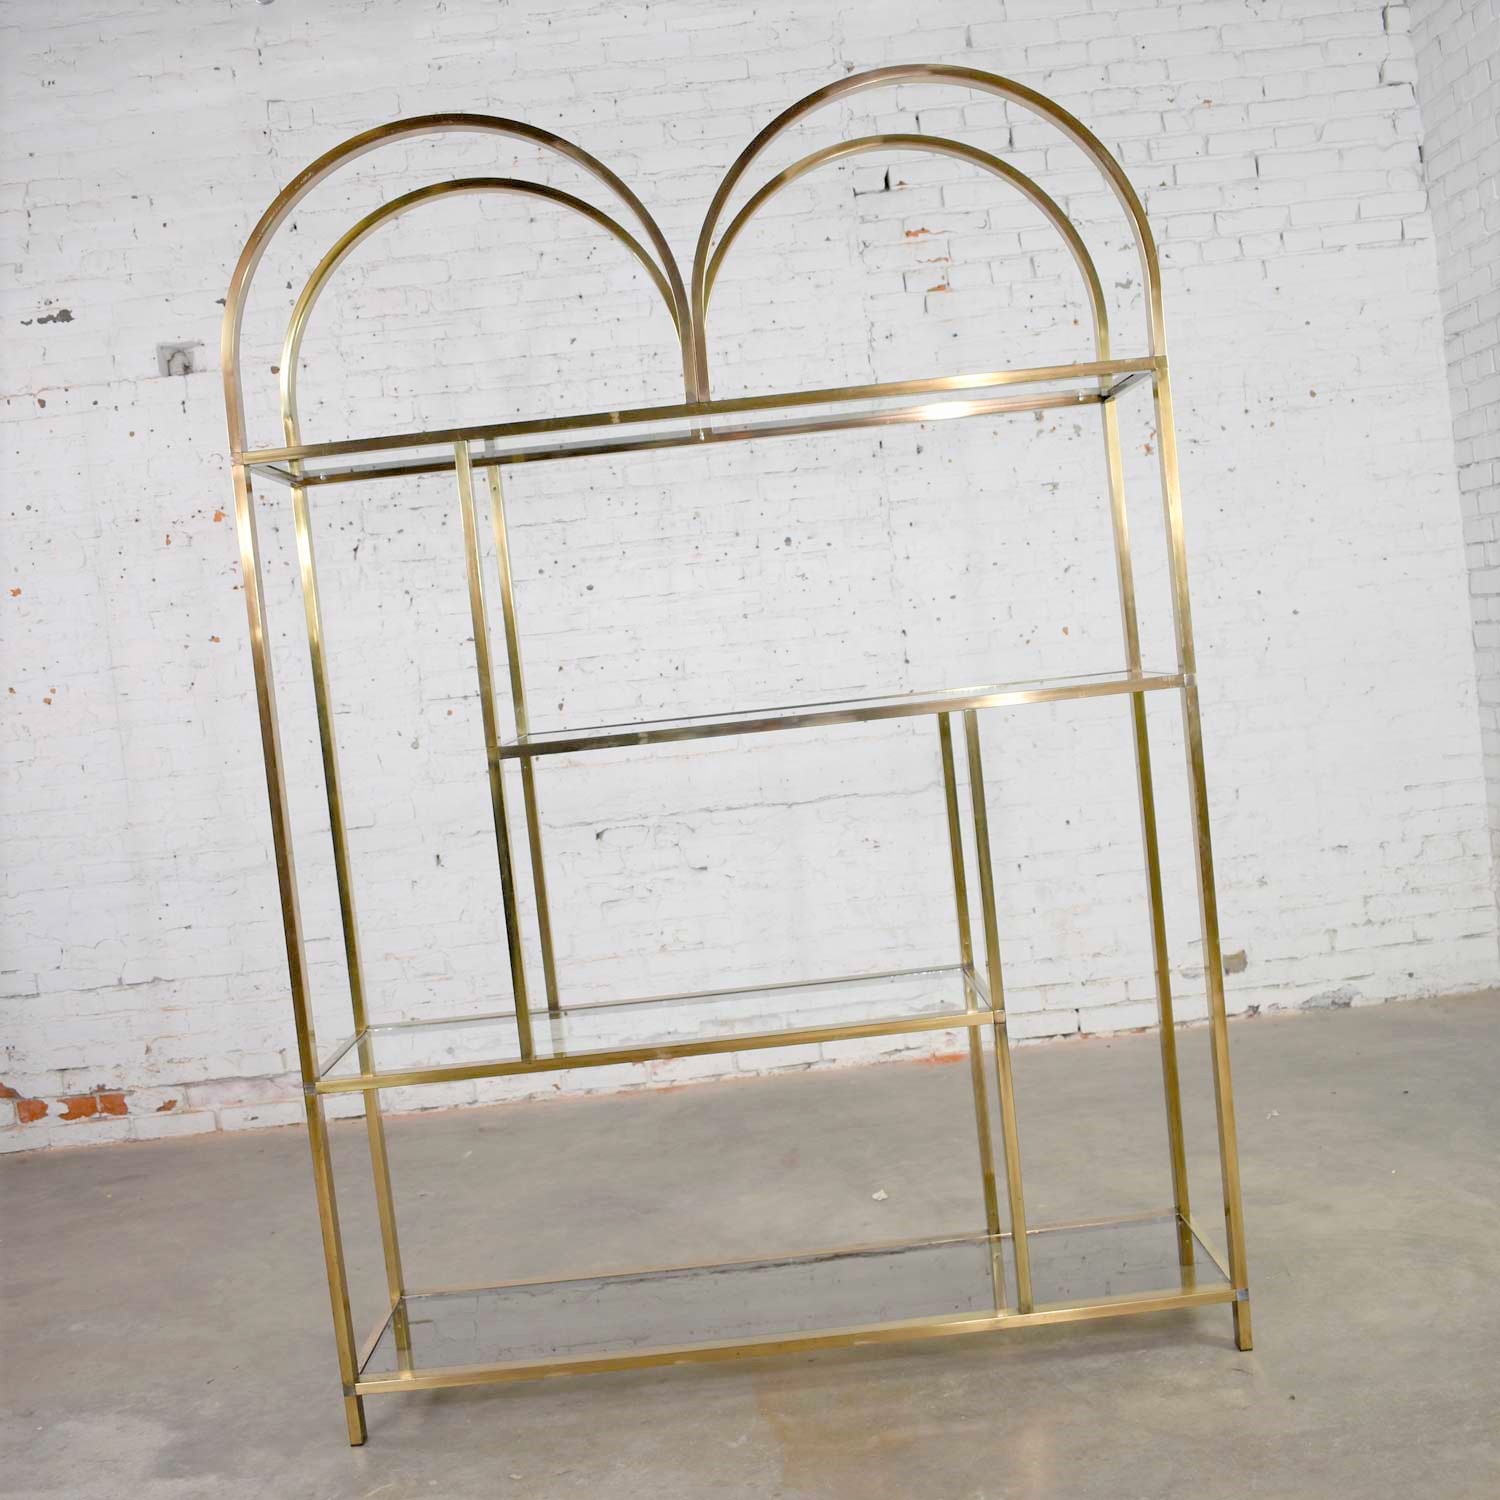 Vintage Modern Double Arched Etagere Display Shelves Brass Plated and Glass